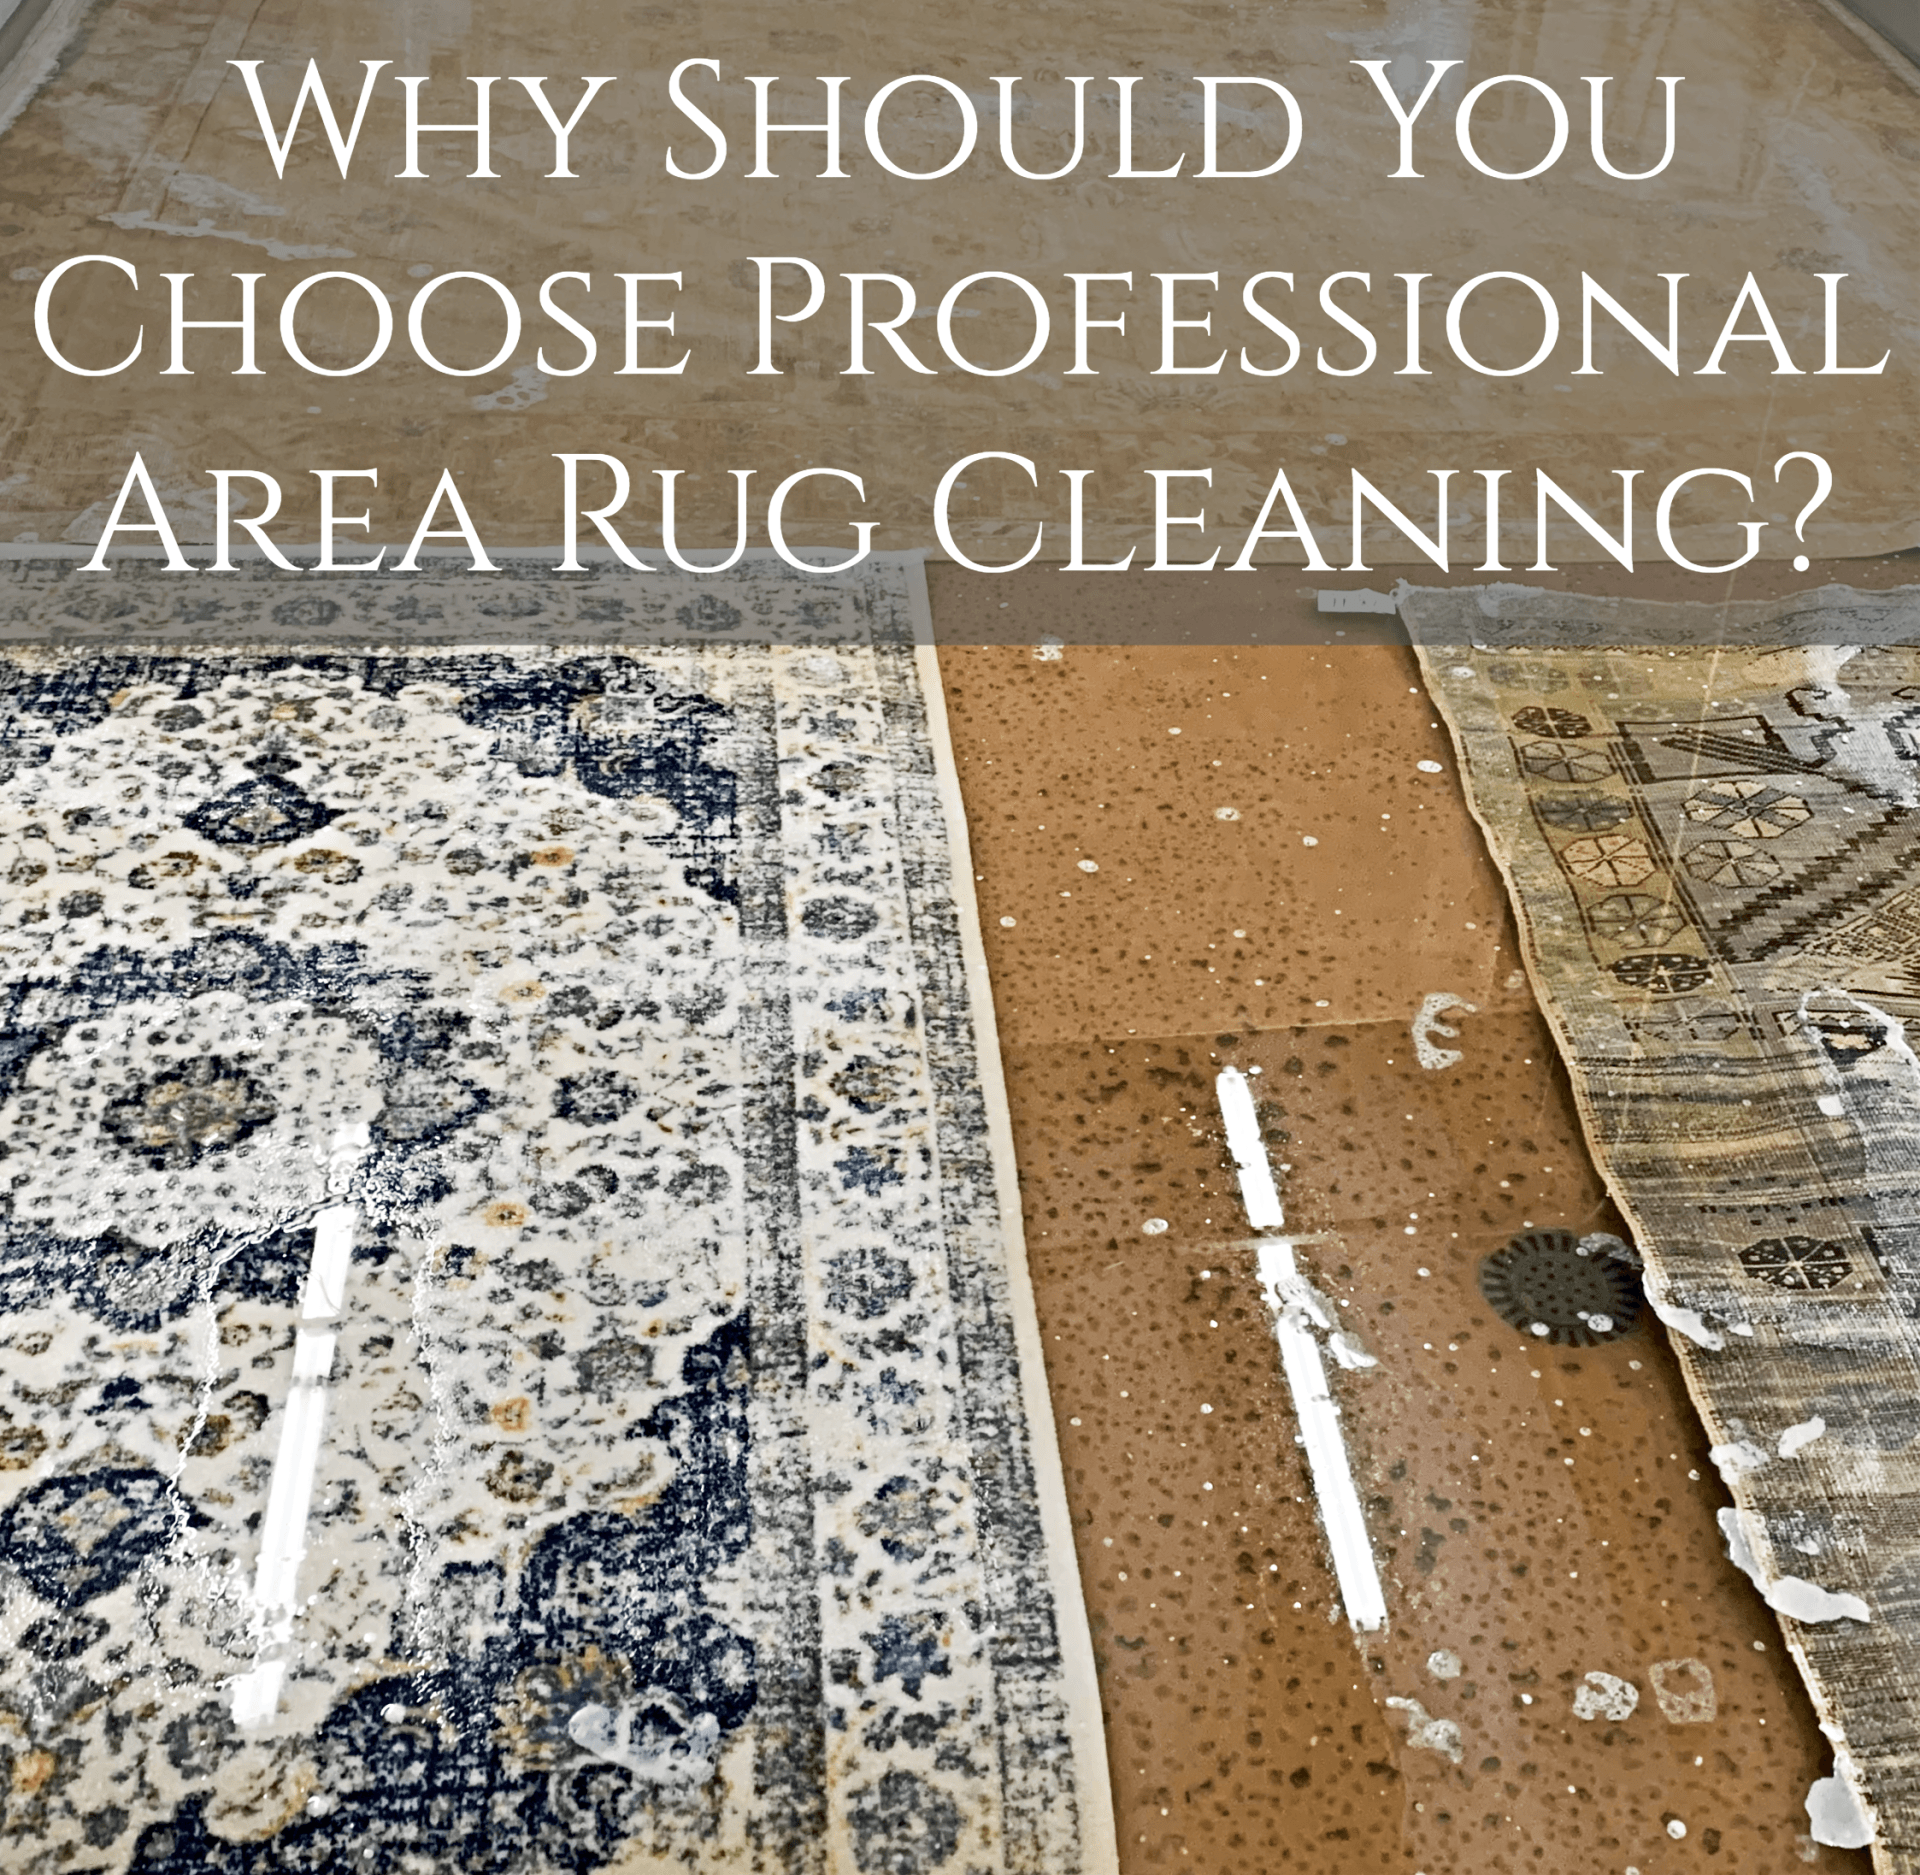 professional area rug cleaning little rock